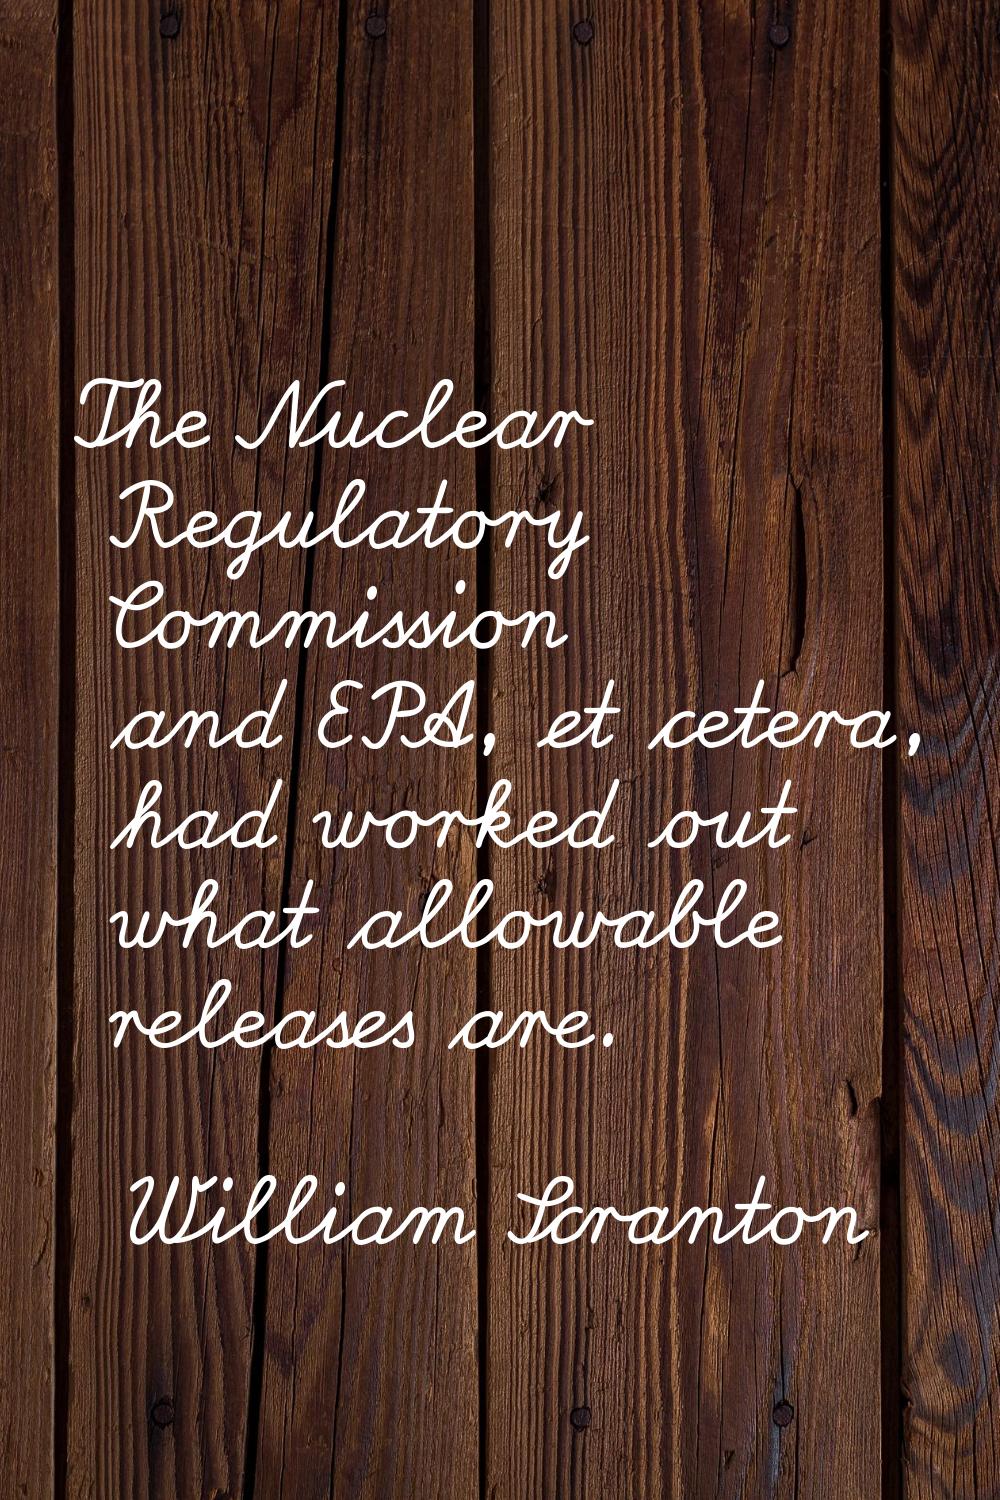 The Nuclear Regulatory Commission and EPA, et cetera, had worked out what allowable releases are.